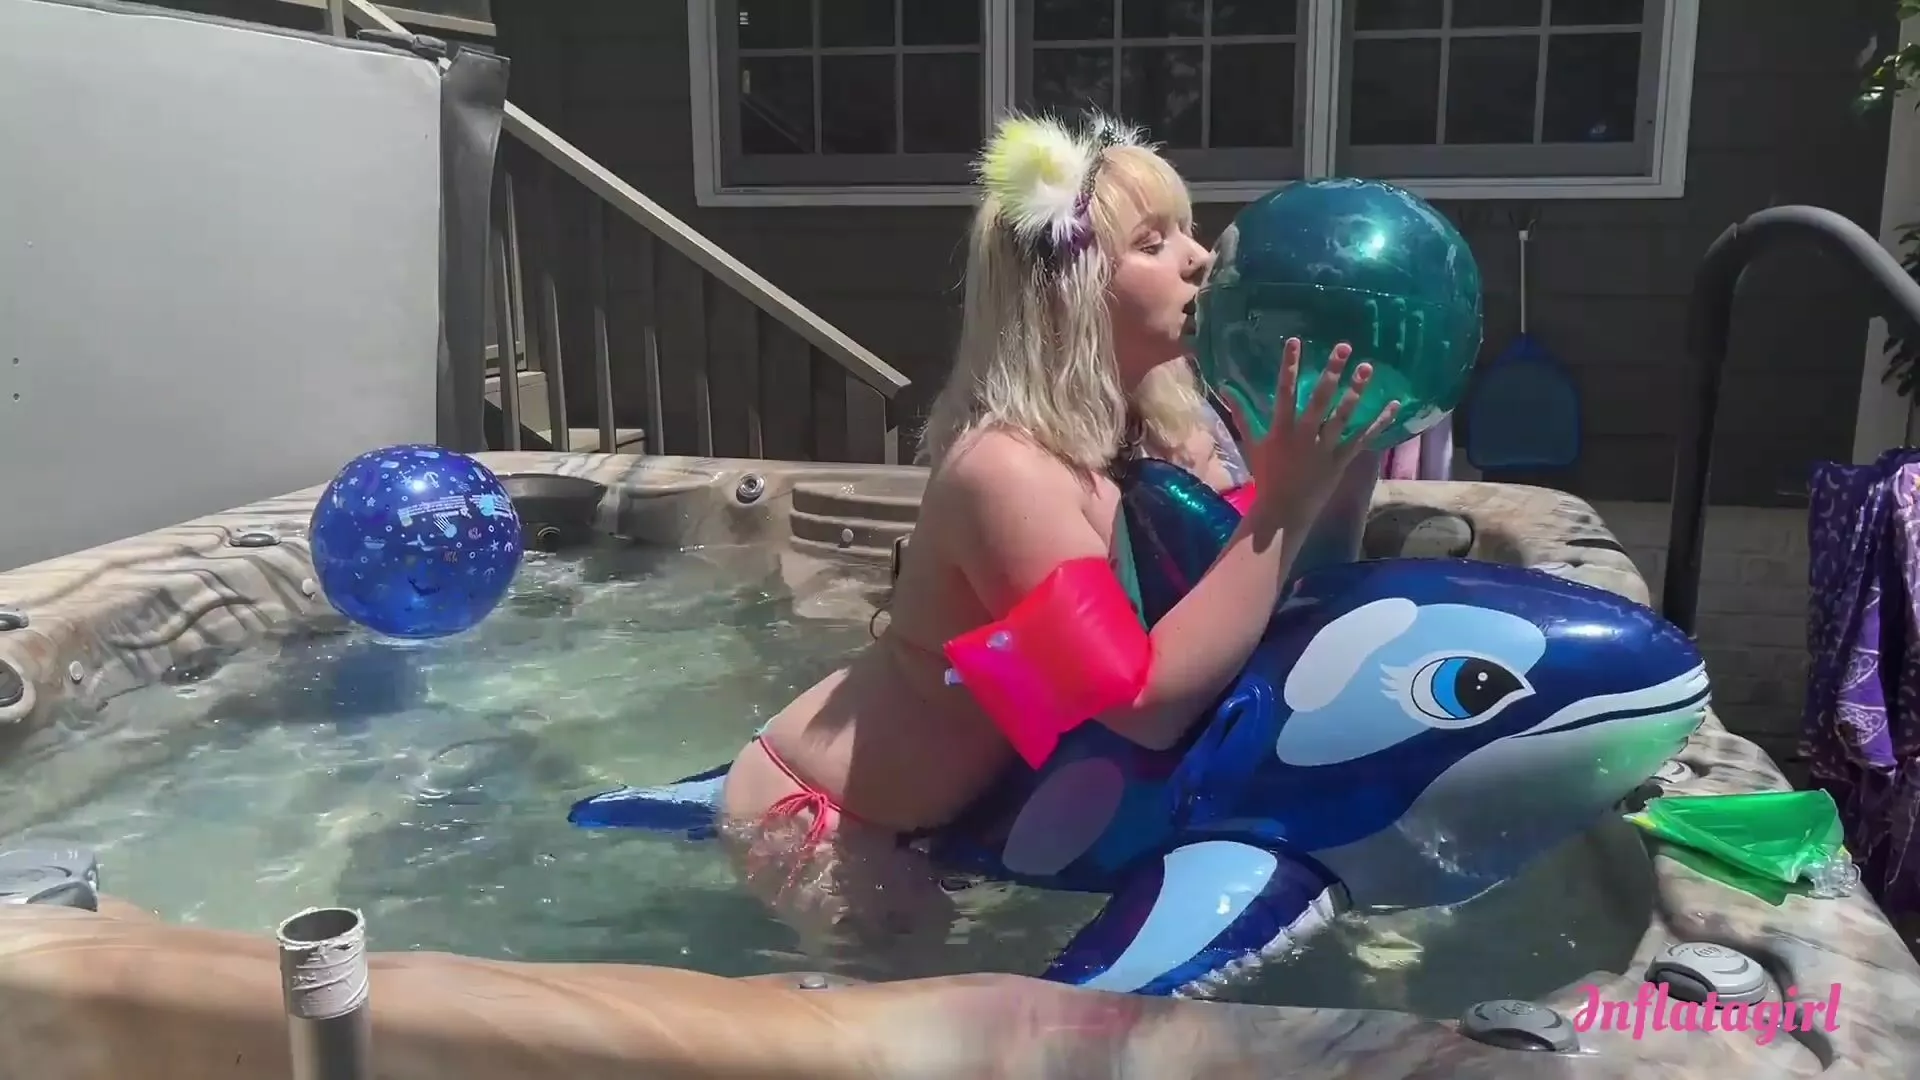 Pool Toy - Inflatagirl fun with my pool toys in the hot tub xxx video